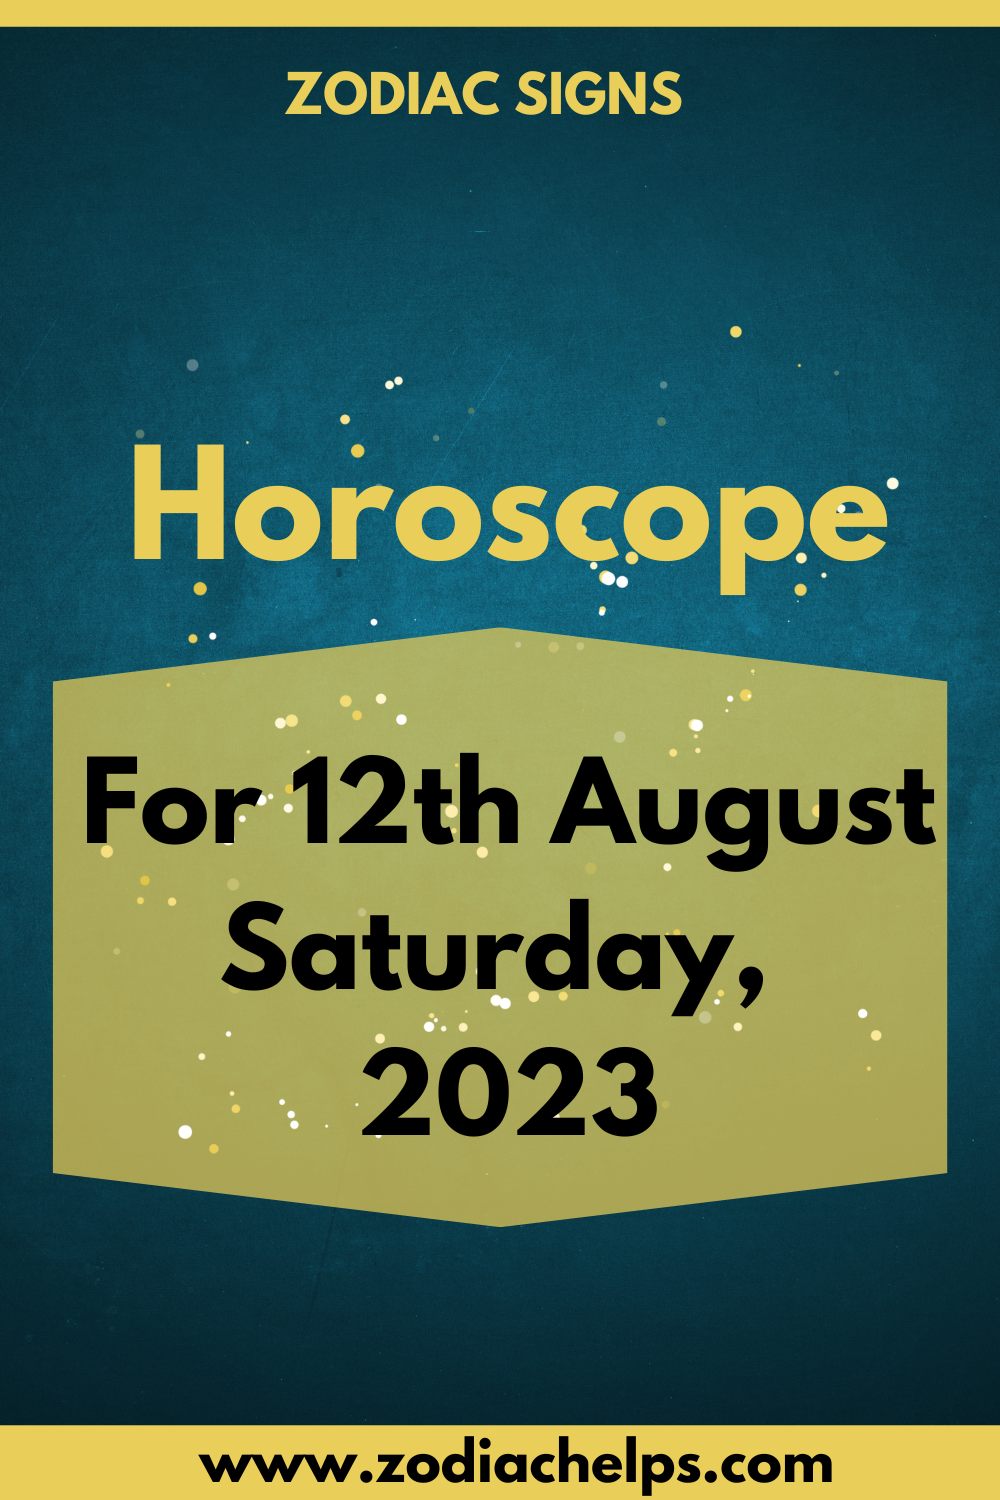 Horoscope for 12th August Saturday, 2023